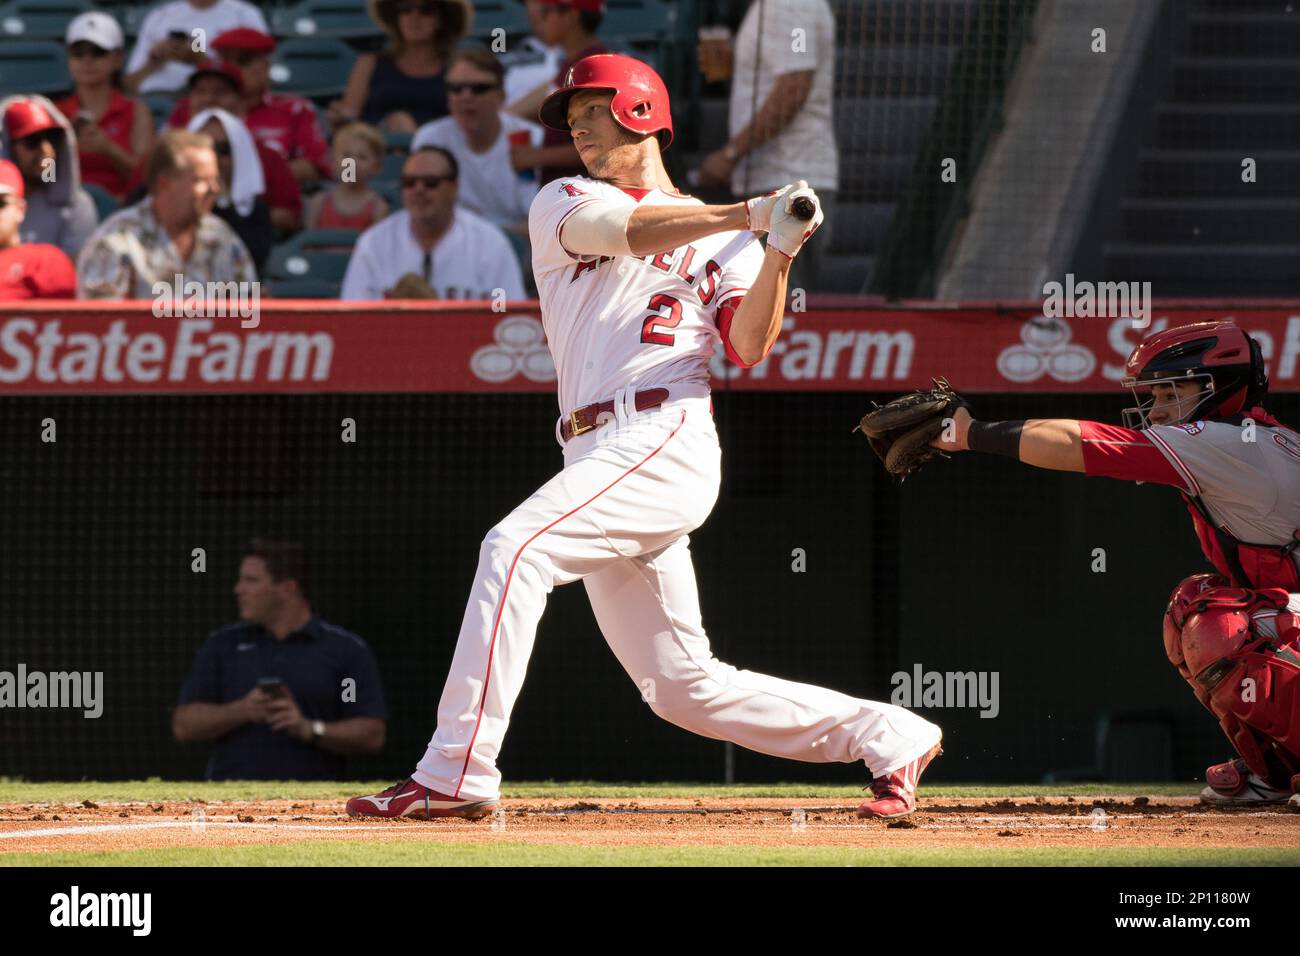 31 August 2016: Los Angeles Angels of Anaheim Shortstop Andrelton Simmons (2)  lines a base hit in the first inning during the game against the Cincinnati  Reds played at Angel Stadium of